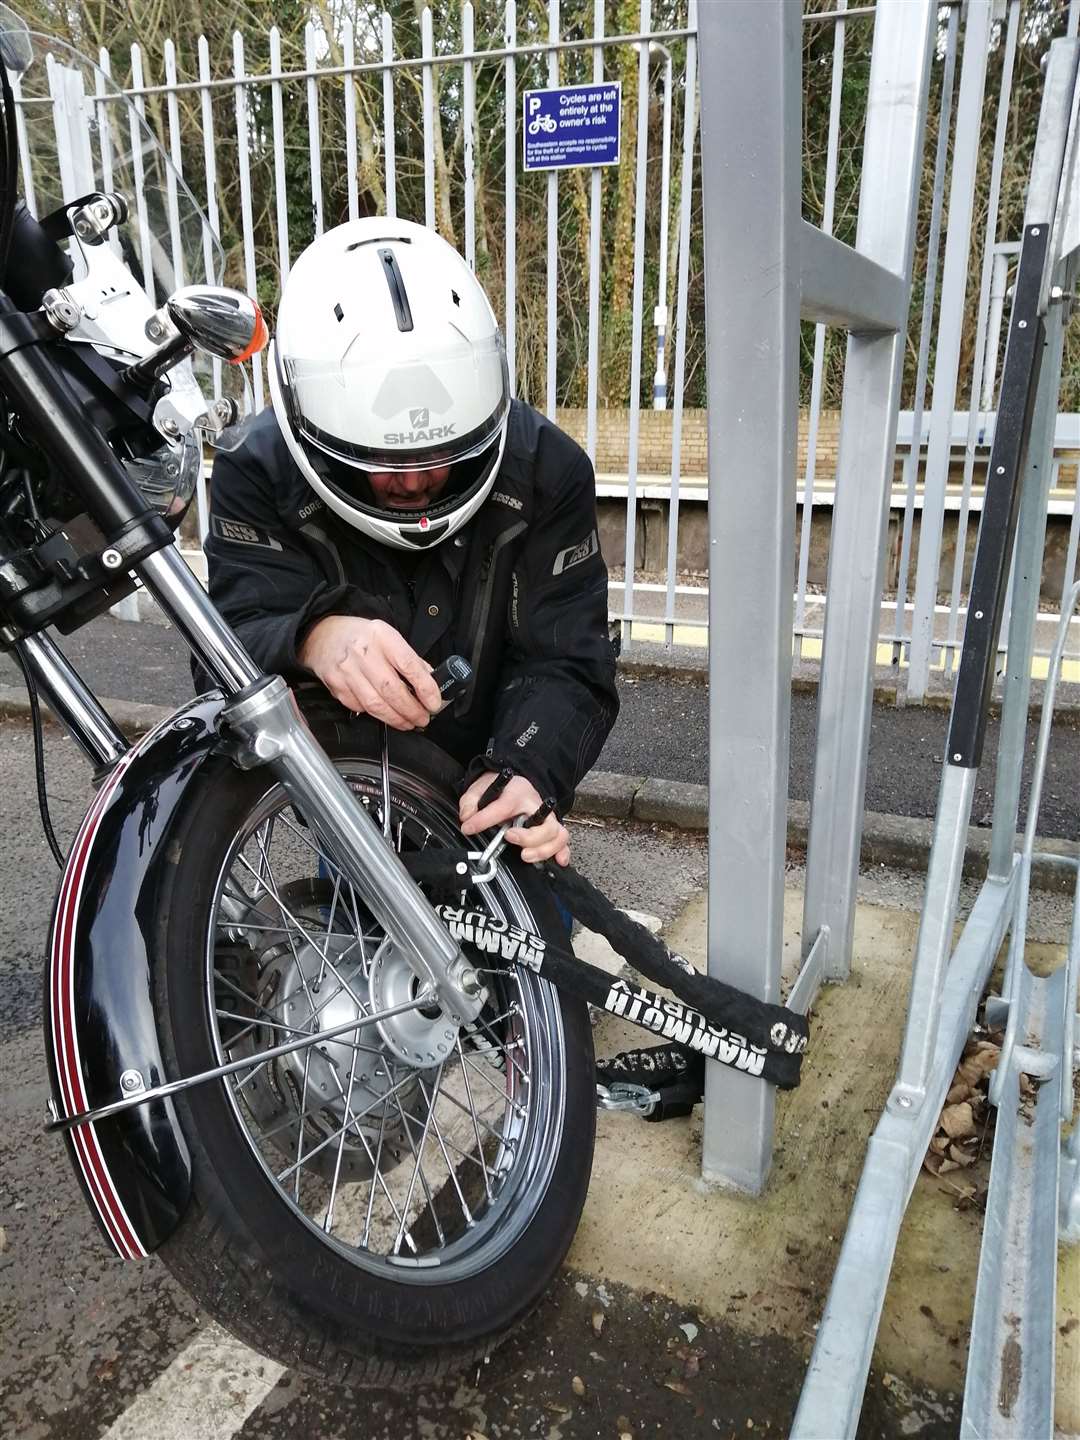 Secure your bike to deter thieves